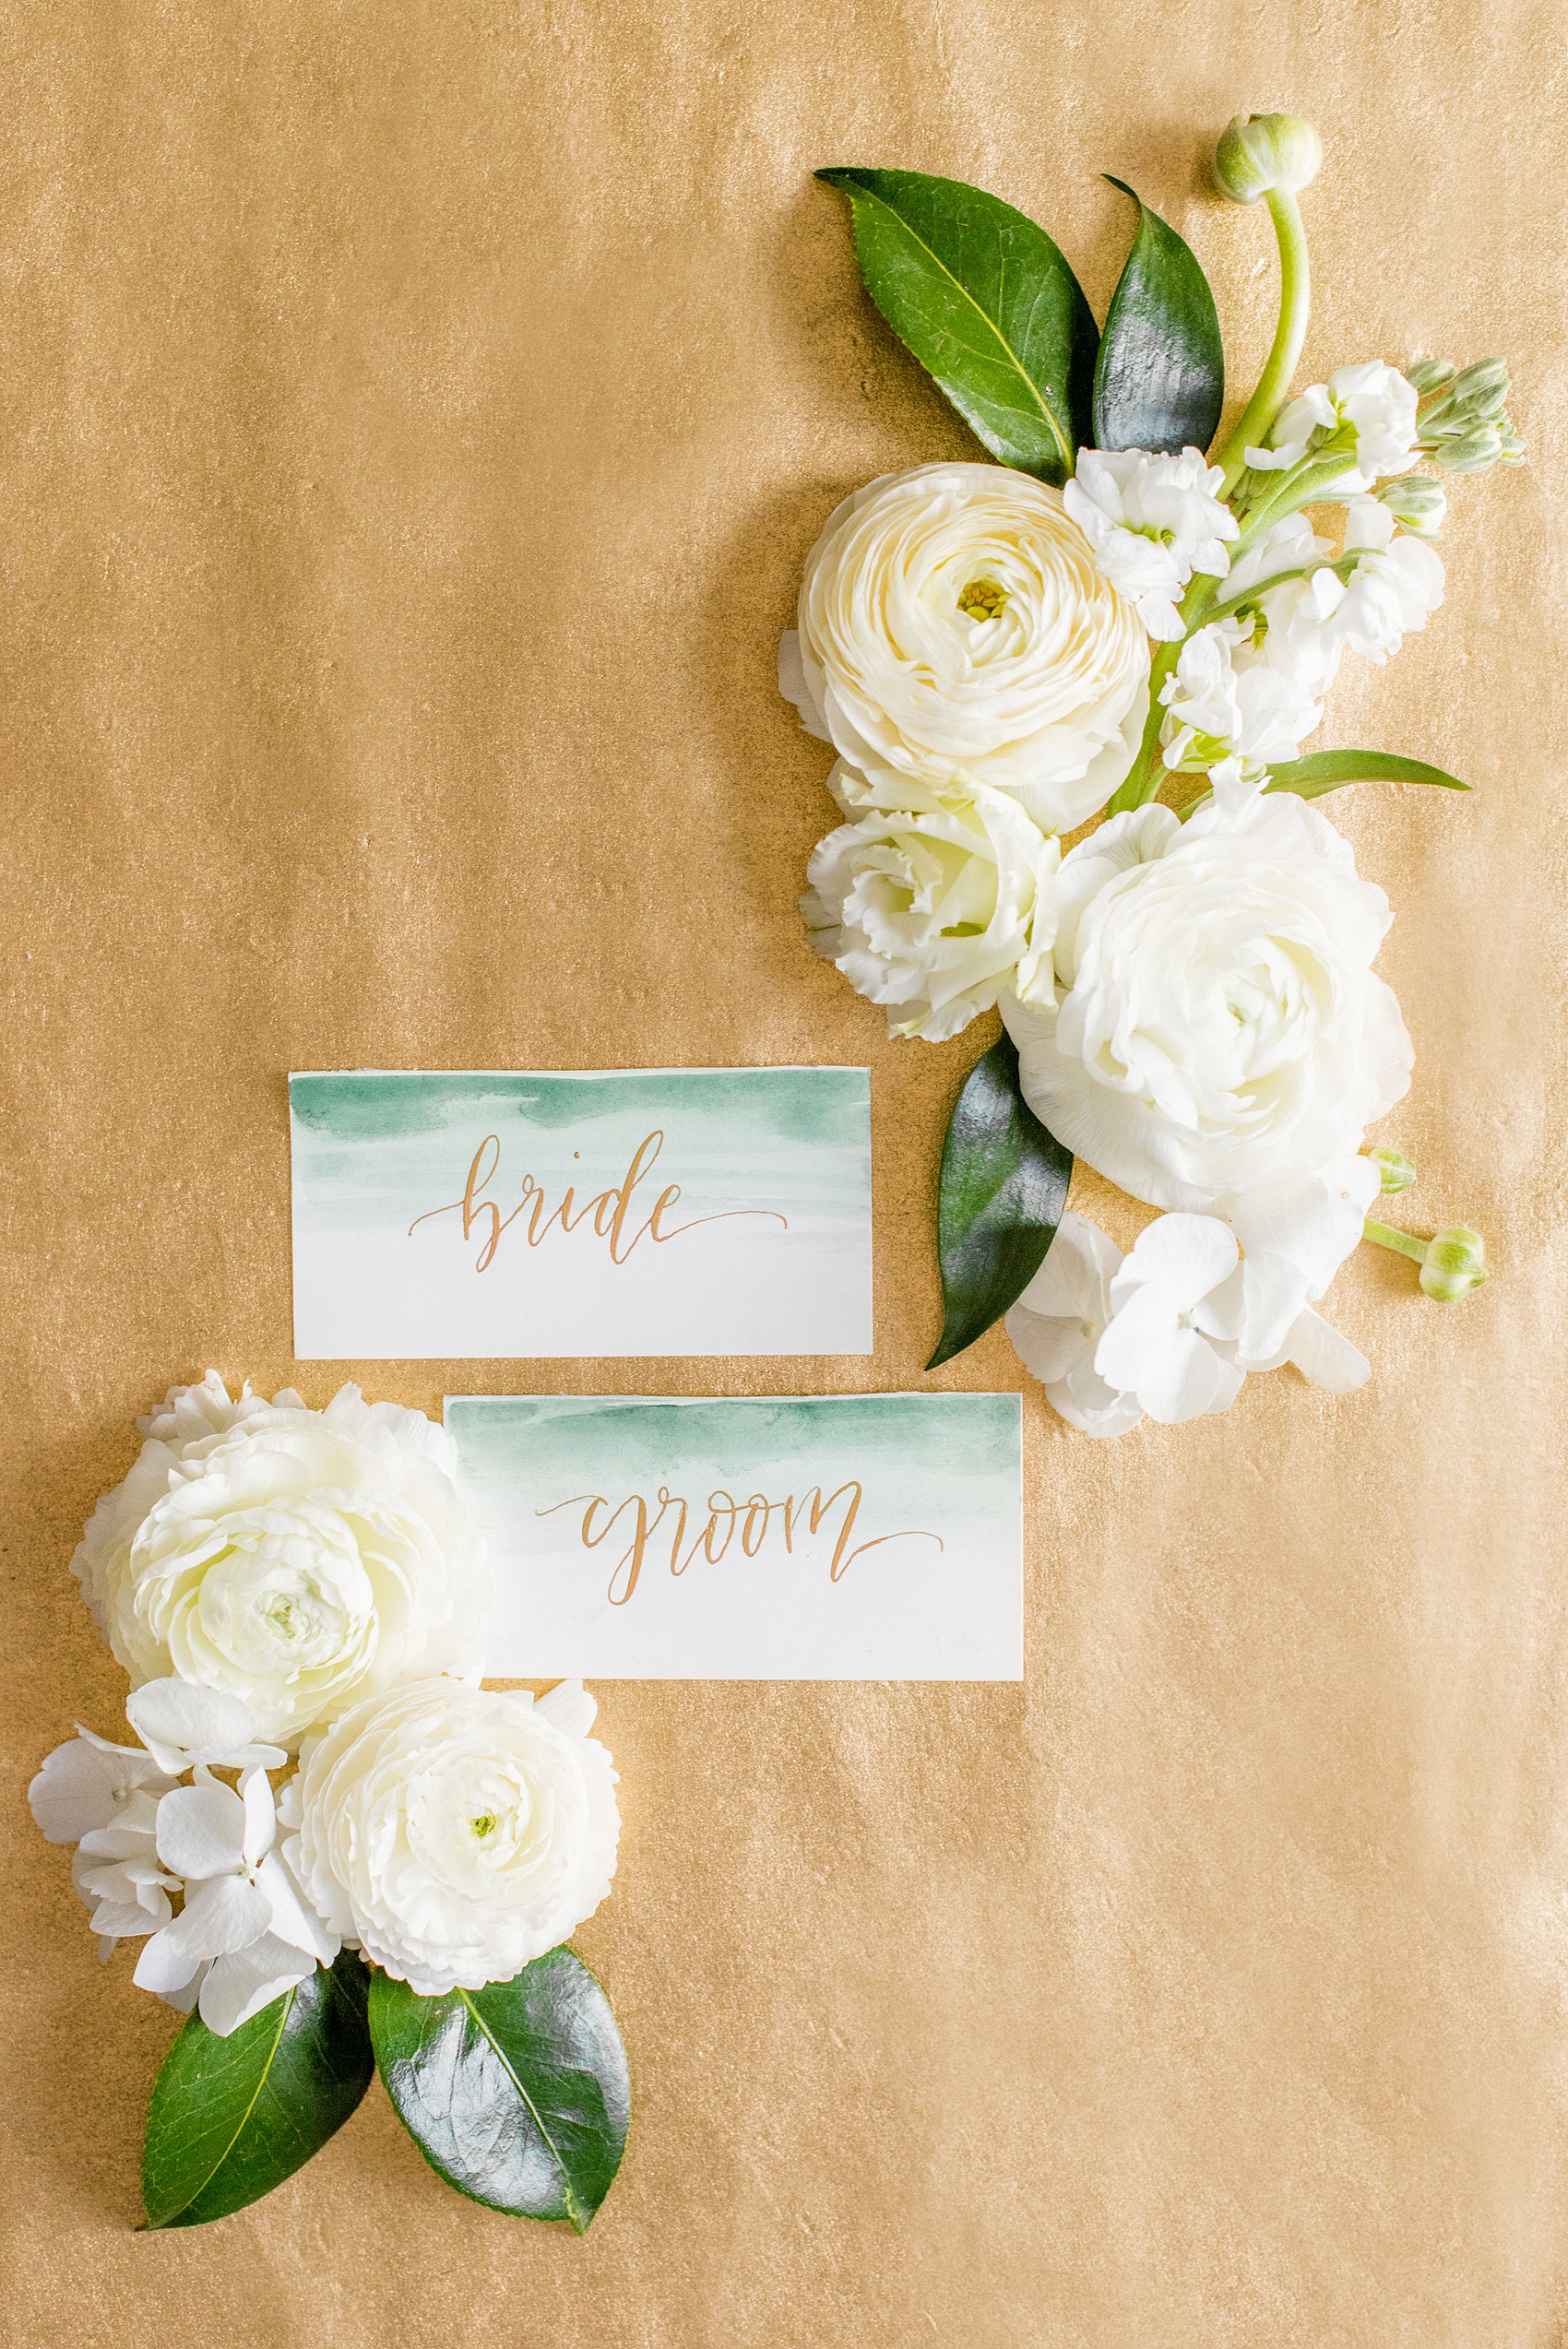 Saratoga Springs destination wedding photos by Mikkel Paige Photography. The event was held at Saratoga National Golf Club venue for a spring celebration. The escort cards stuck with the gold and green color palette, and had a brush of watercolor at the top with gold calligraphy. #SaratogaSpringsNY #SaratogaSprings #mikkelpaige #NYwedding #destinationwedding #saratogaweddingvenue #golfcoursewedding #customdraping #springwedding